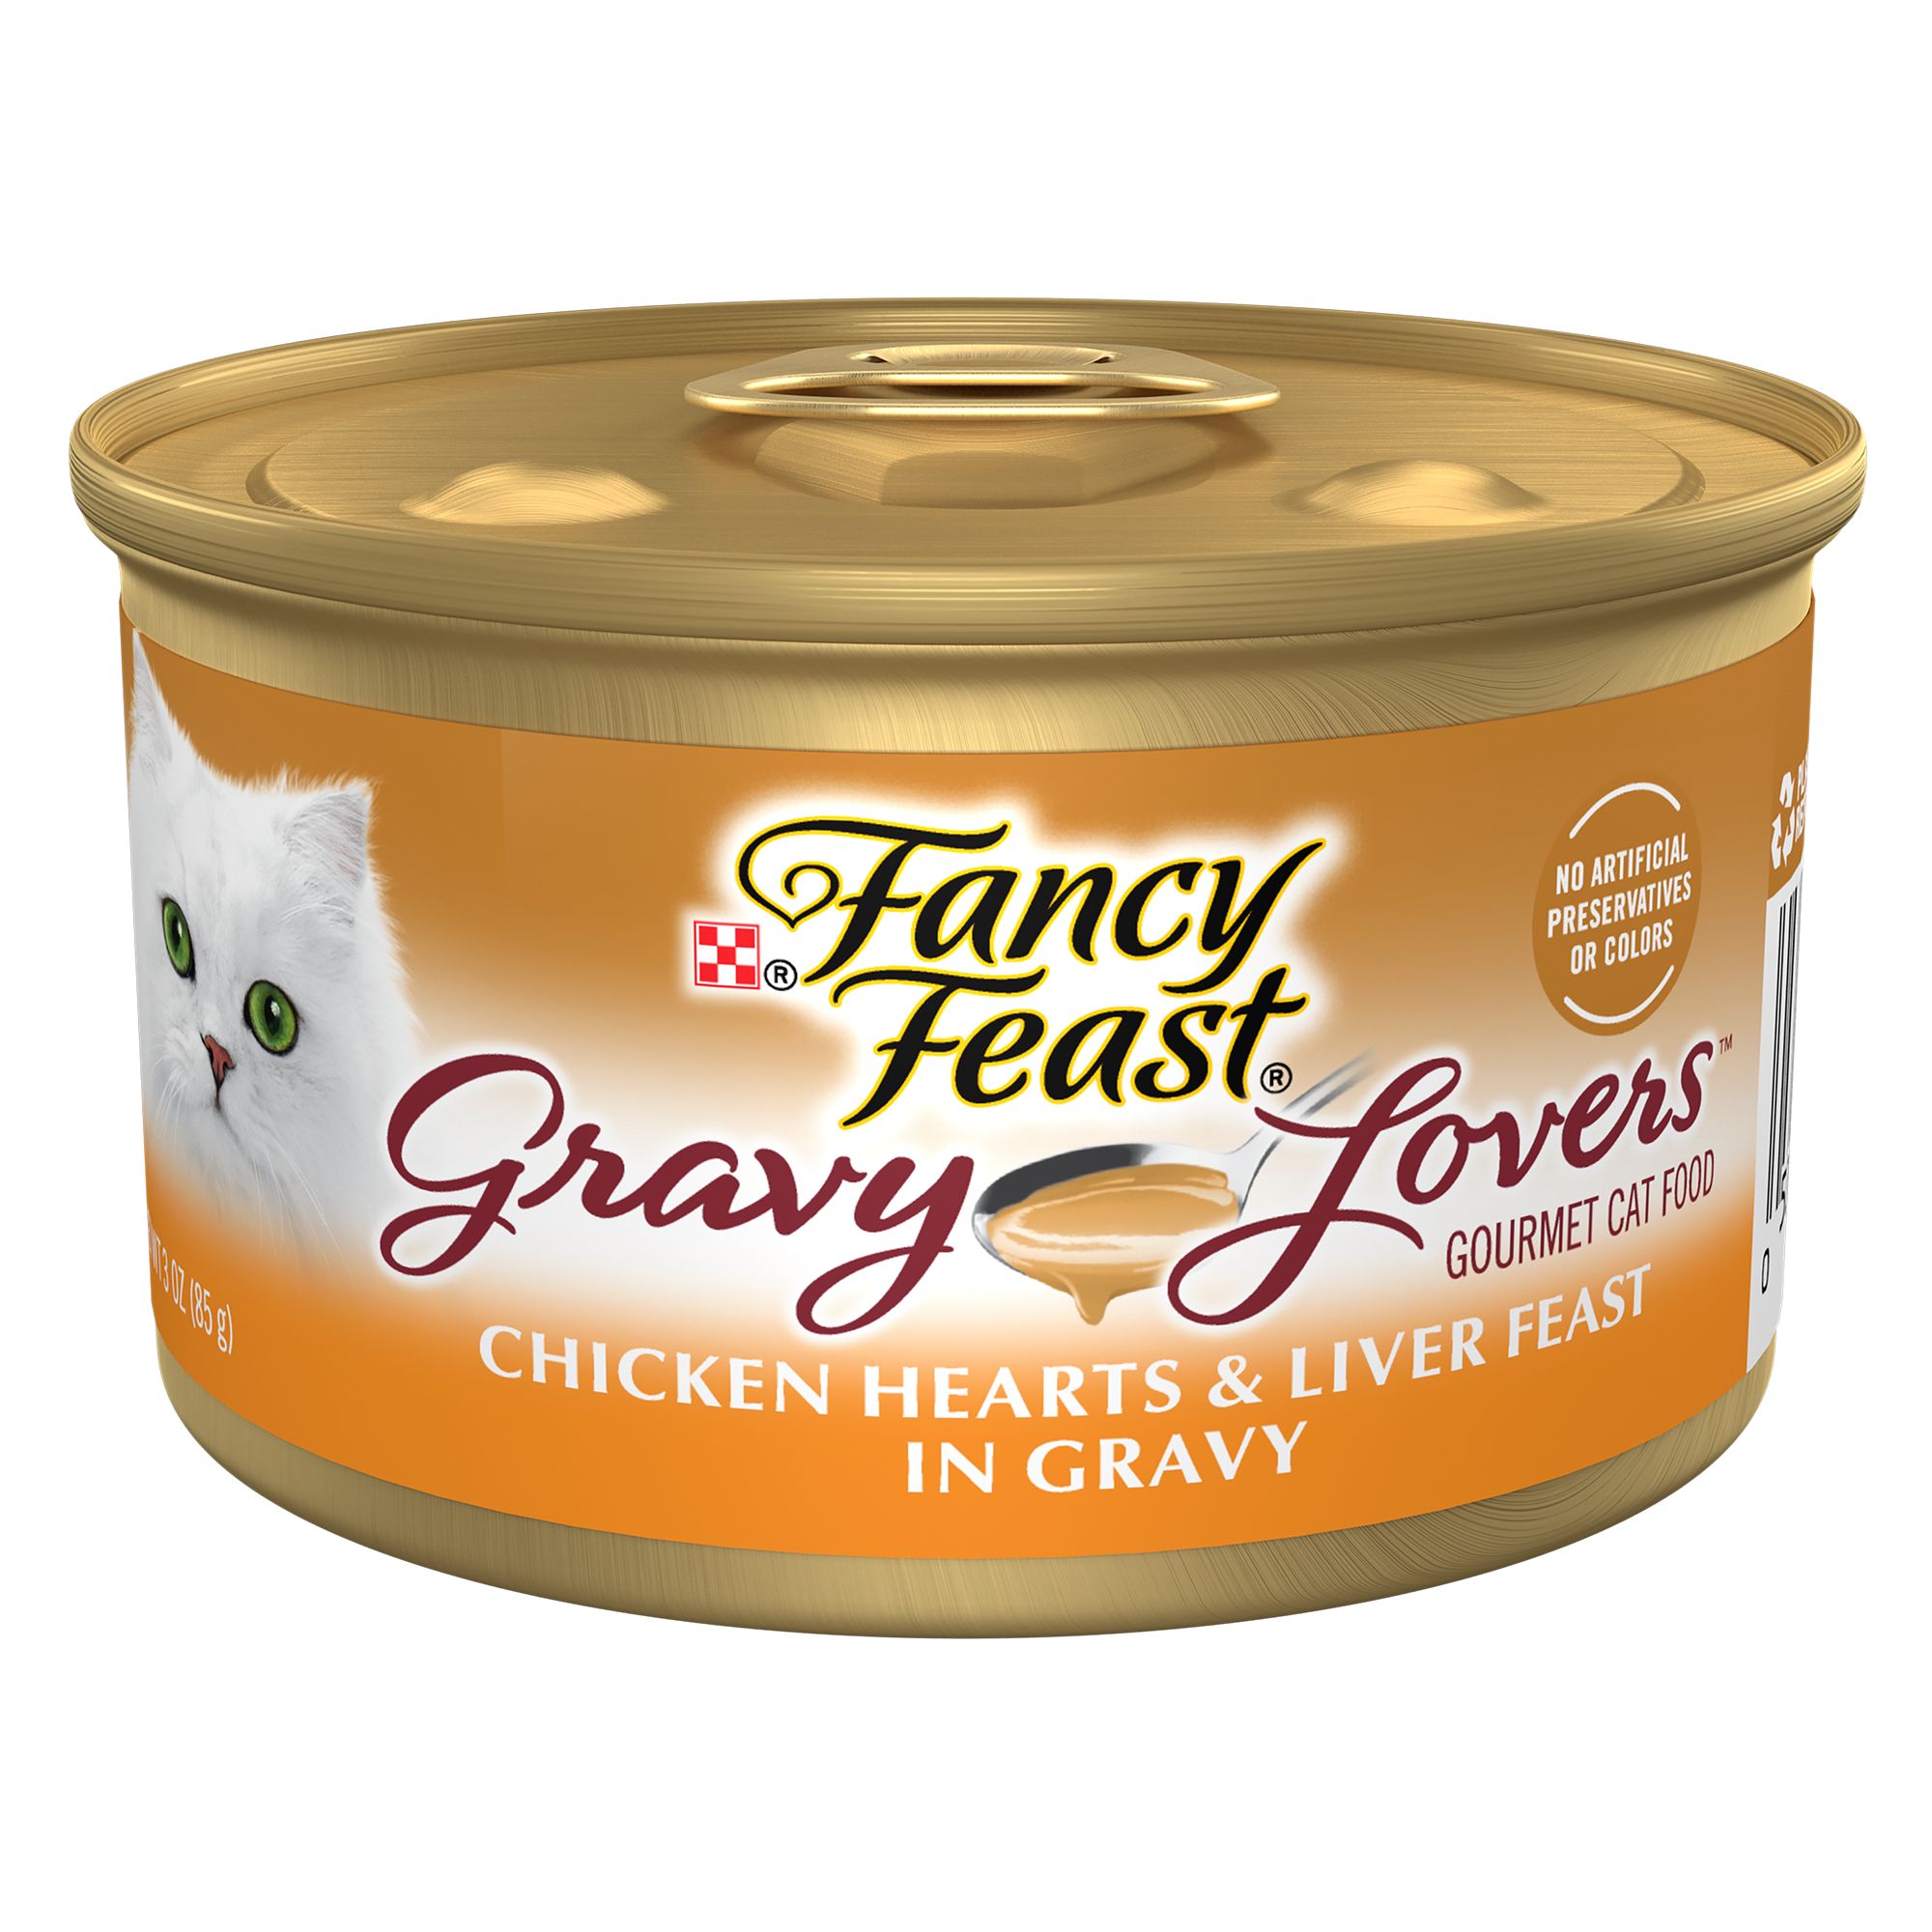 How many 3 oz cans of cat food per day Fancy Feast Gravy Lovers Cat Food Petsmart